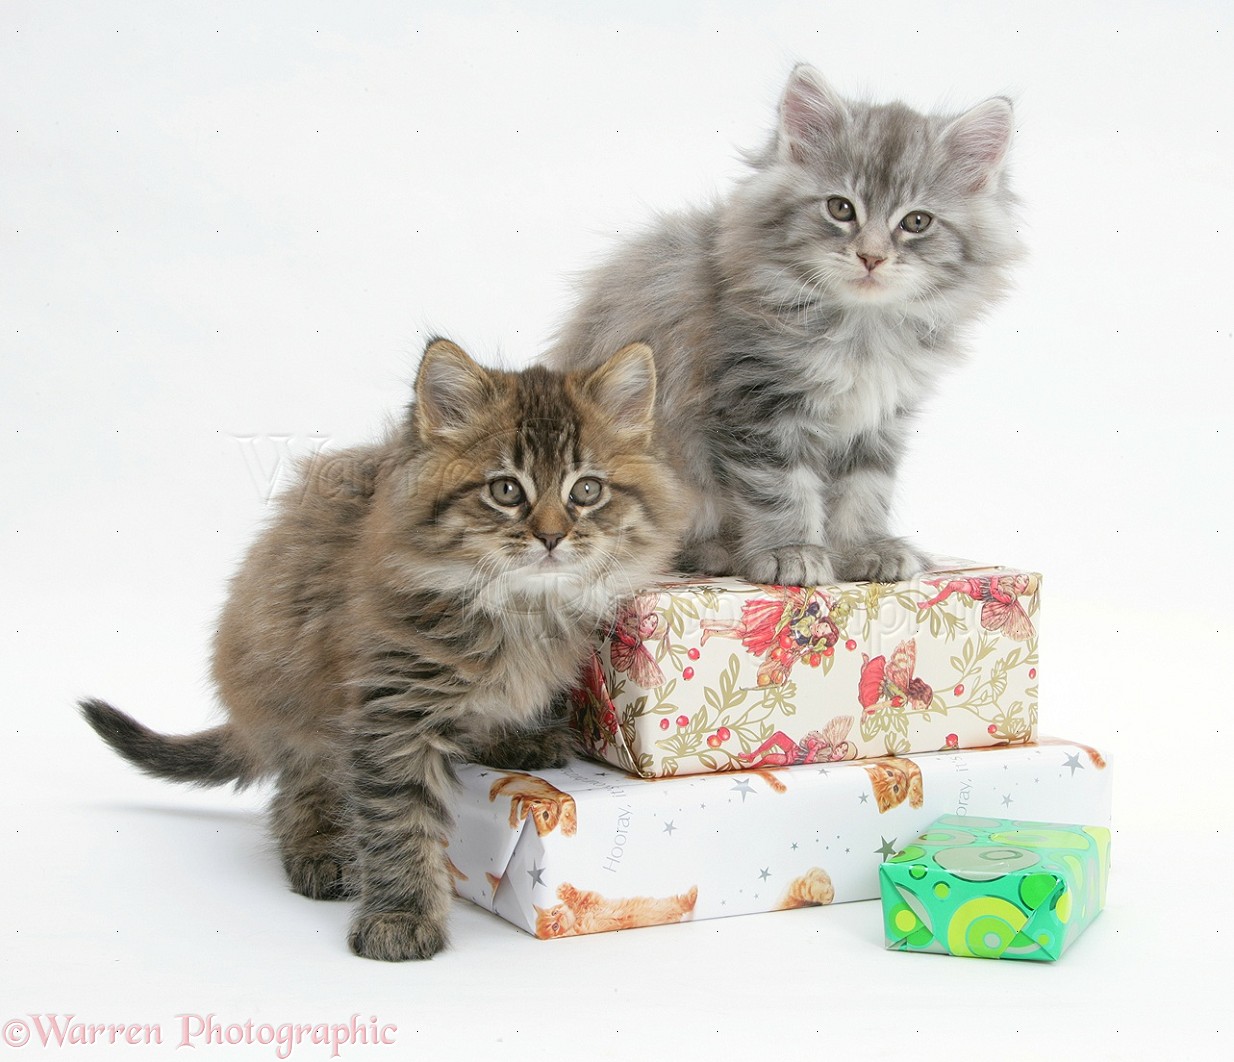 Maine Coon kittens sitting on birthday presents photo WP19121